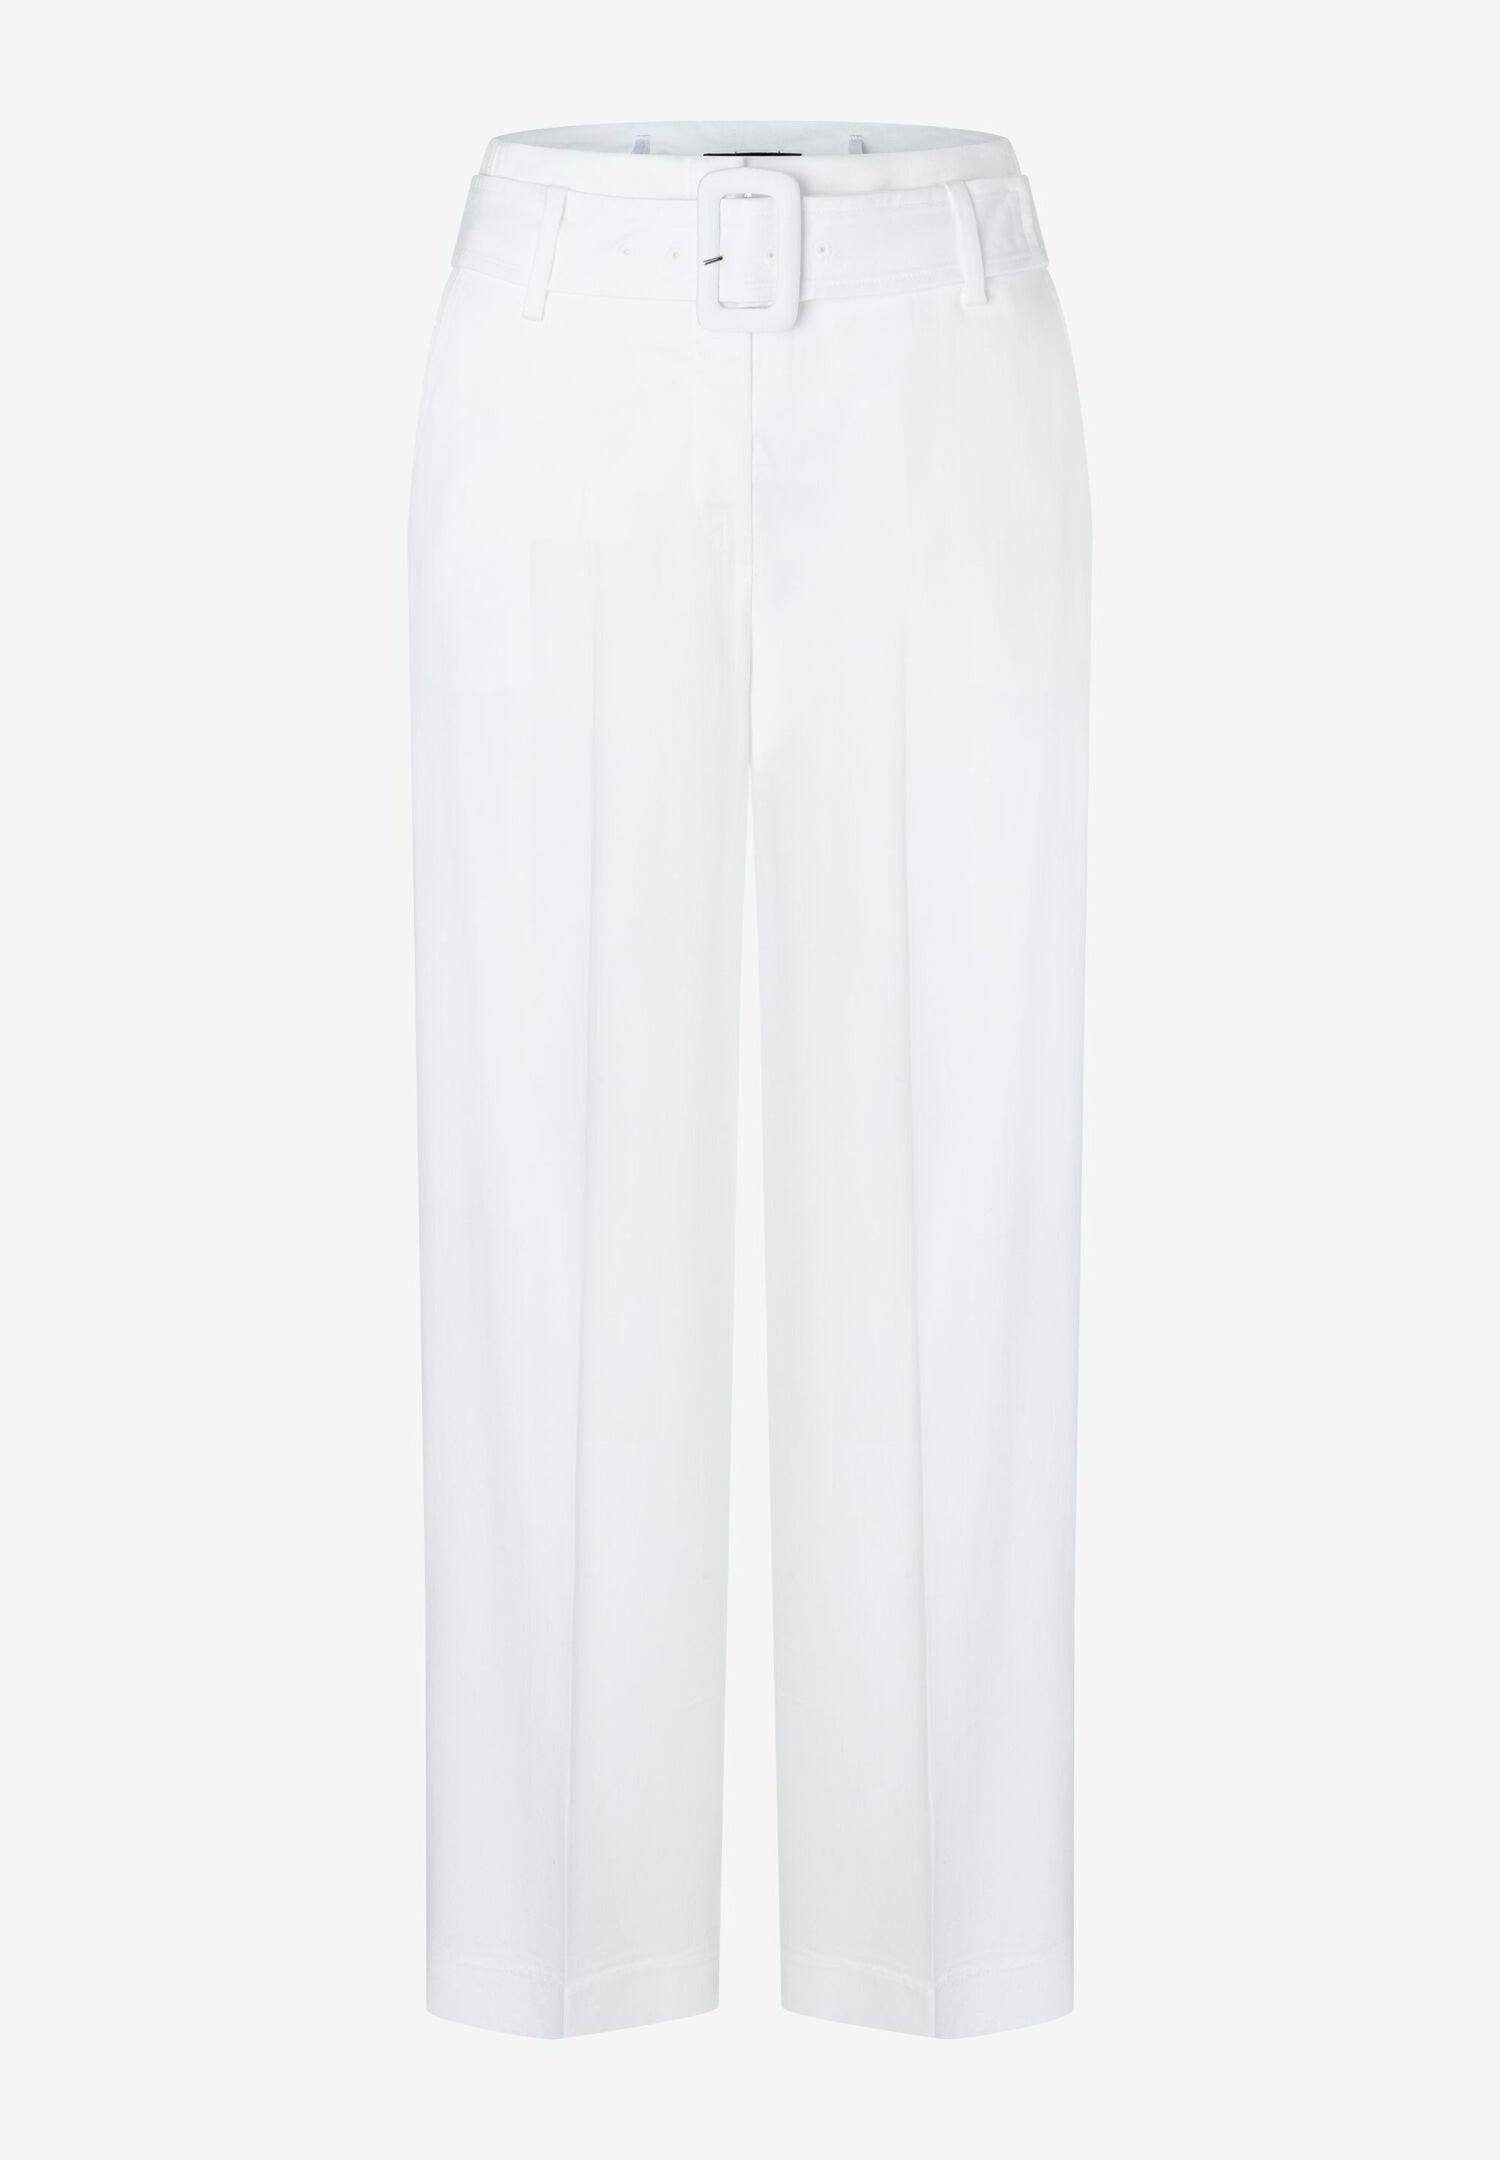 White Cropped Culotte Style Trousers_03